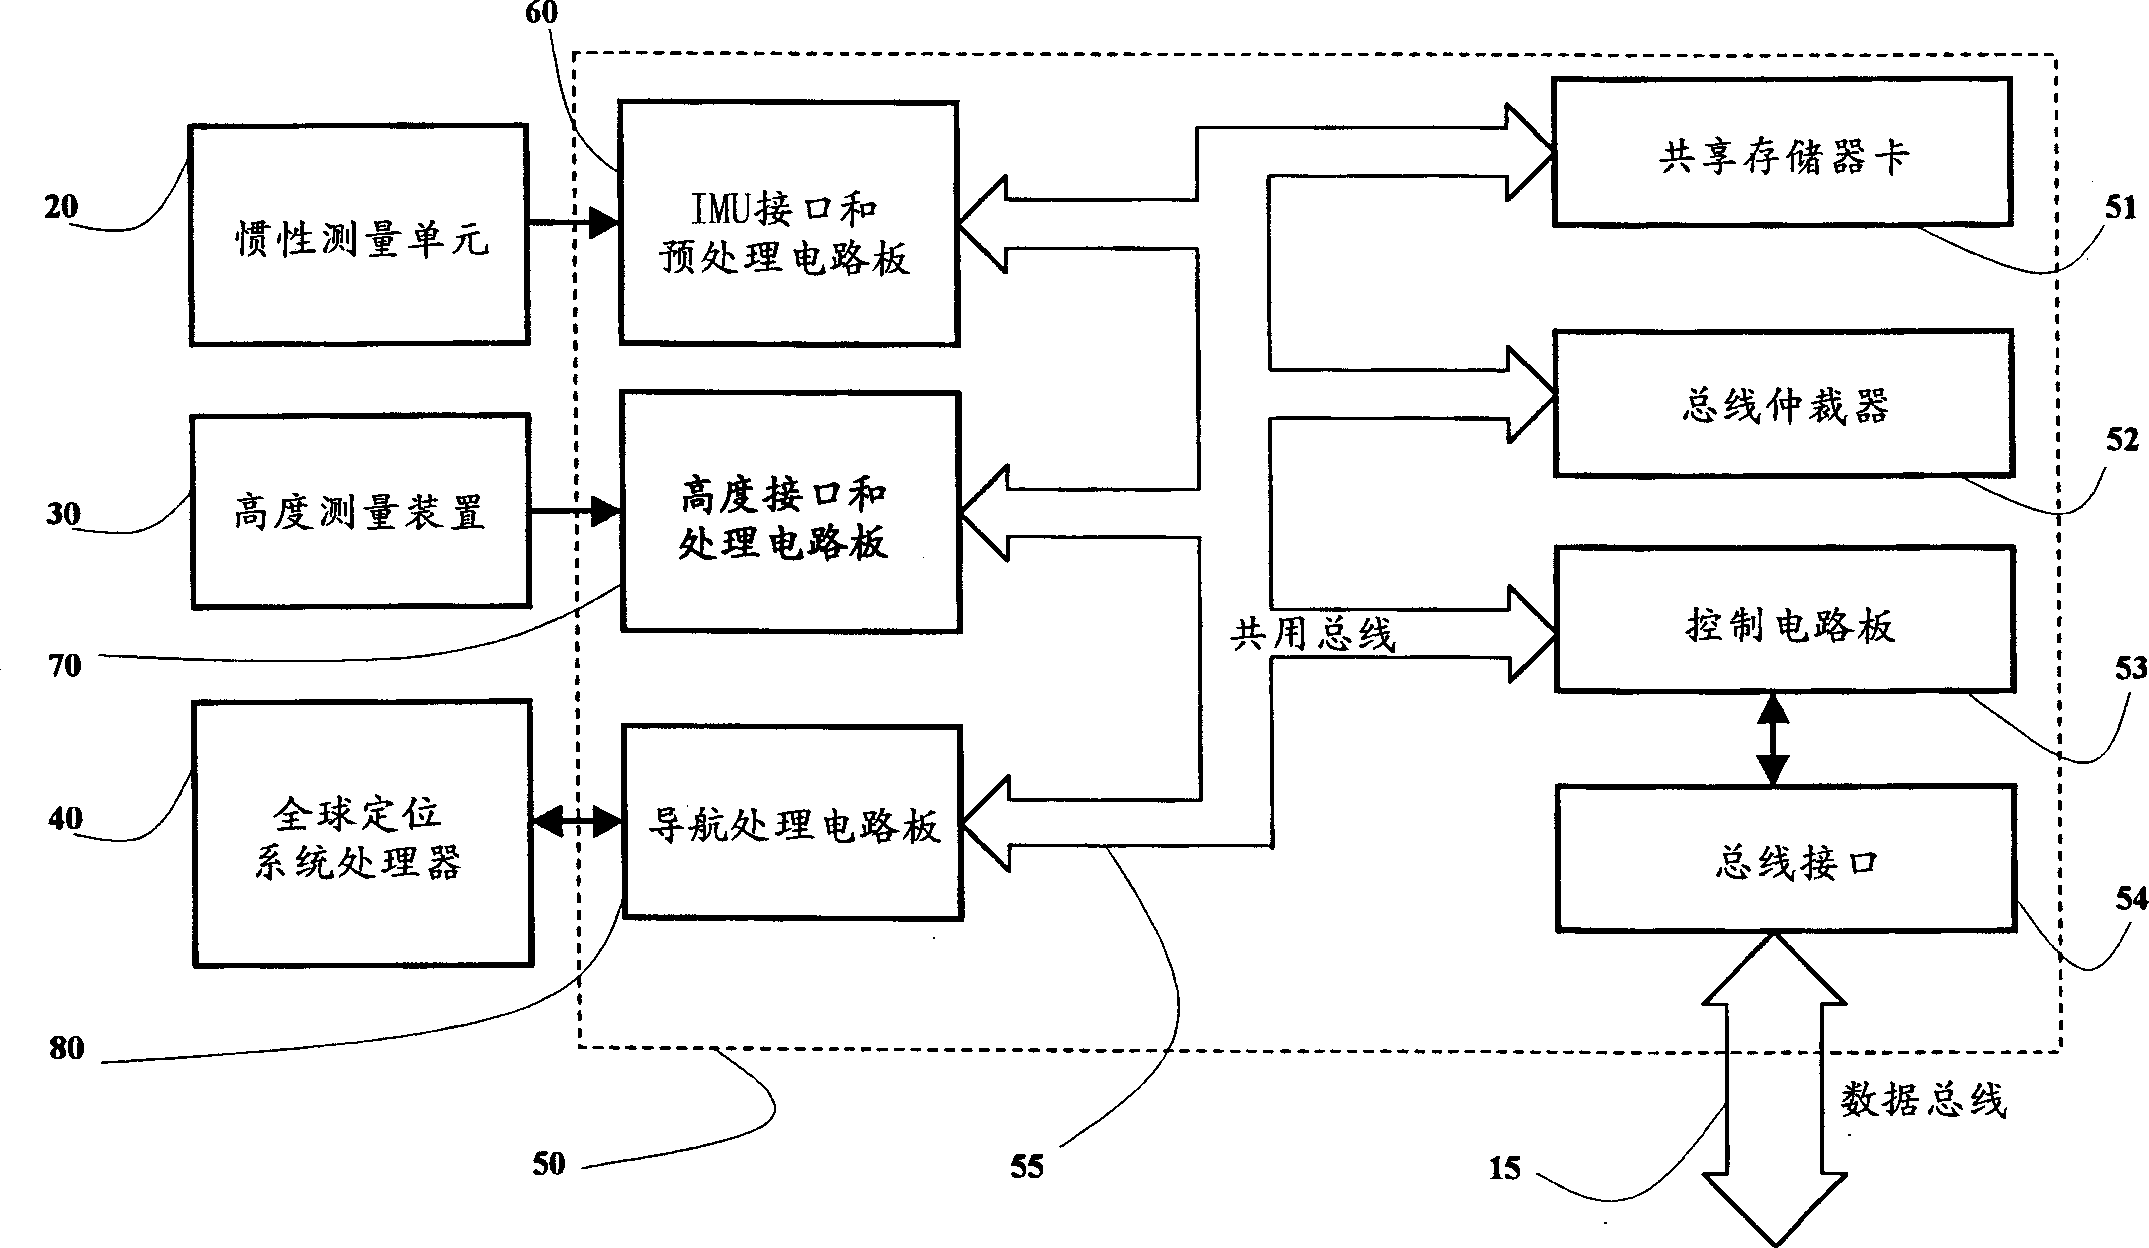 Improved positioning and data integrating method and system thereof